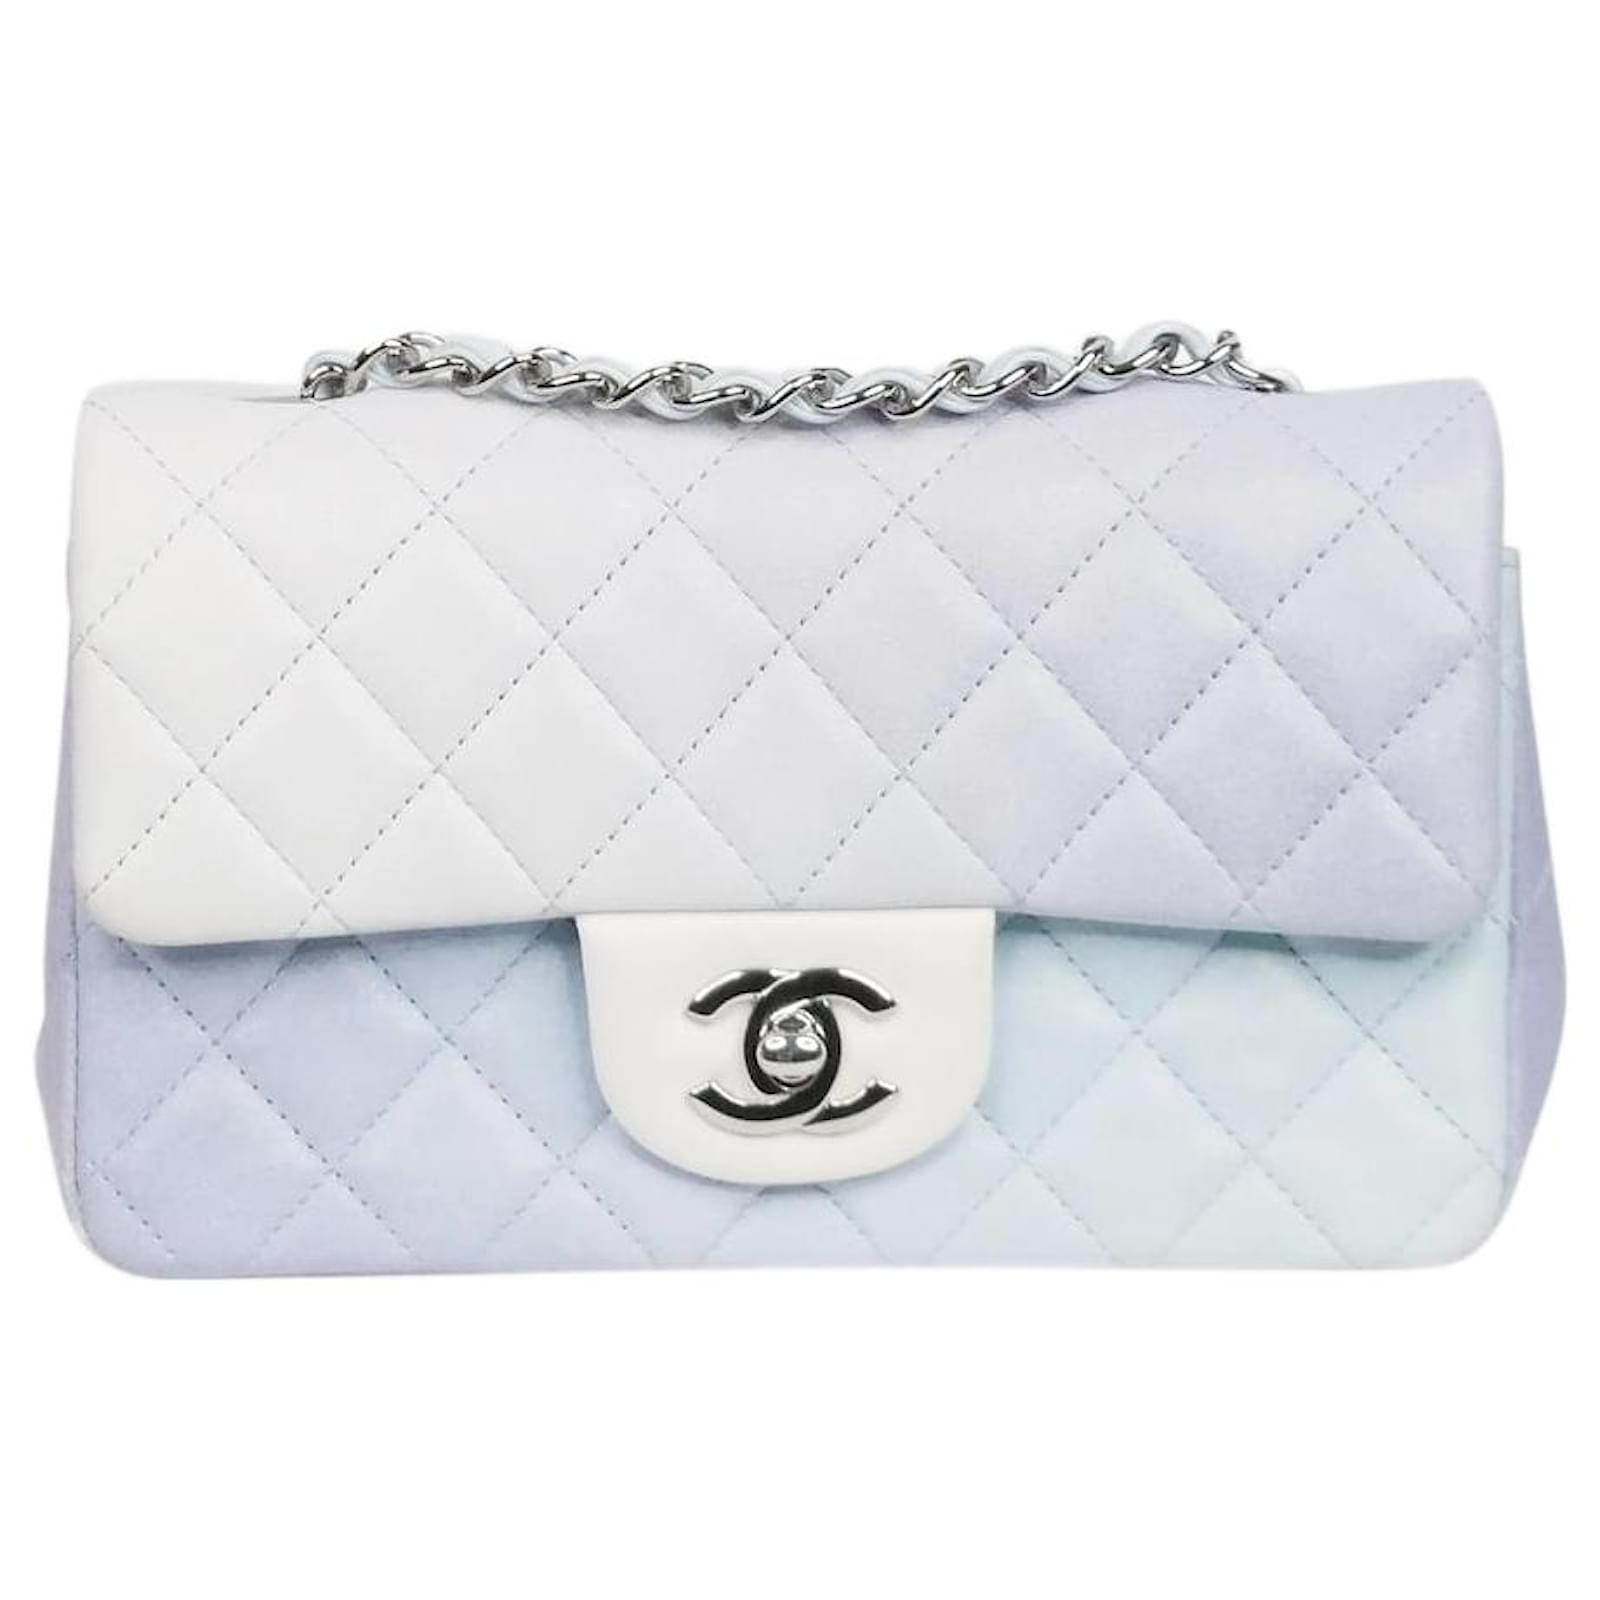 off white chanel bag authentic